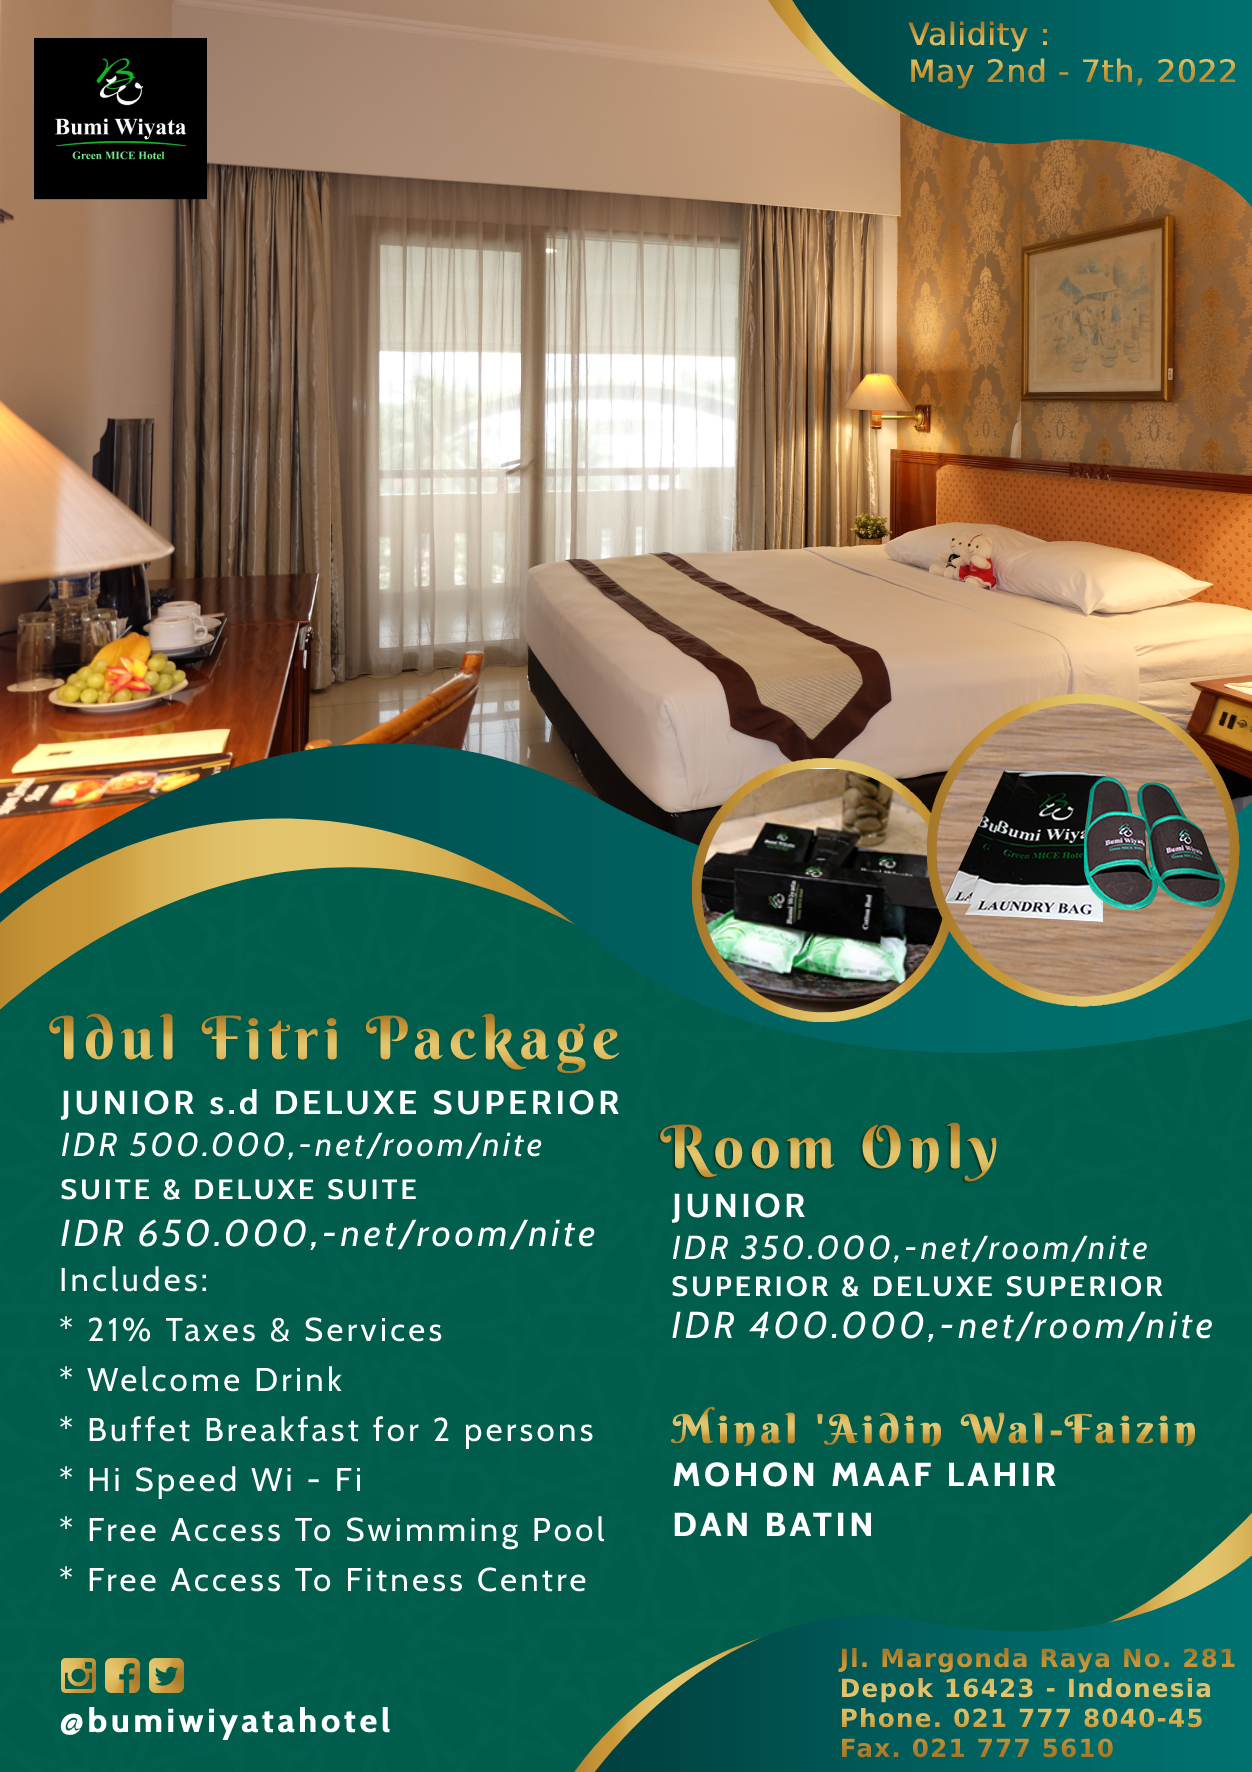 Idul Fitri Package